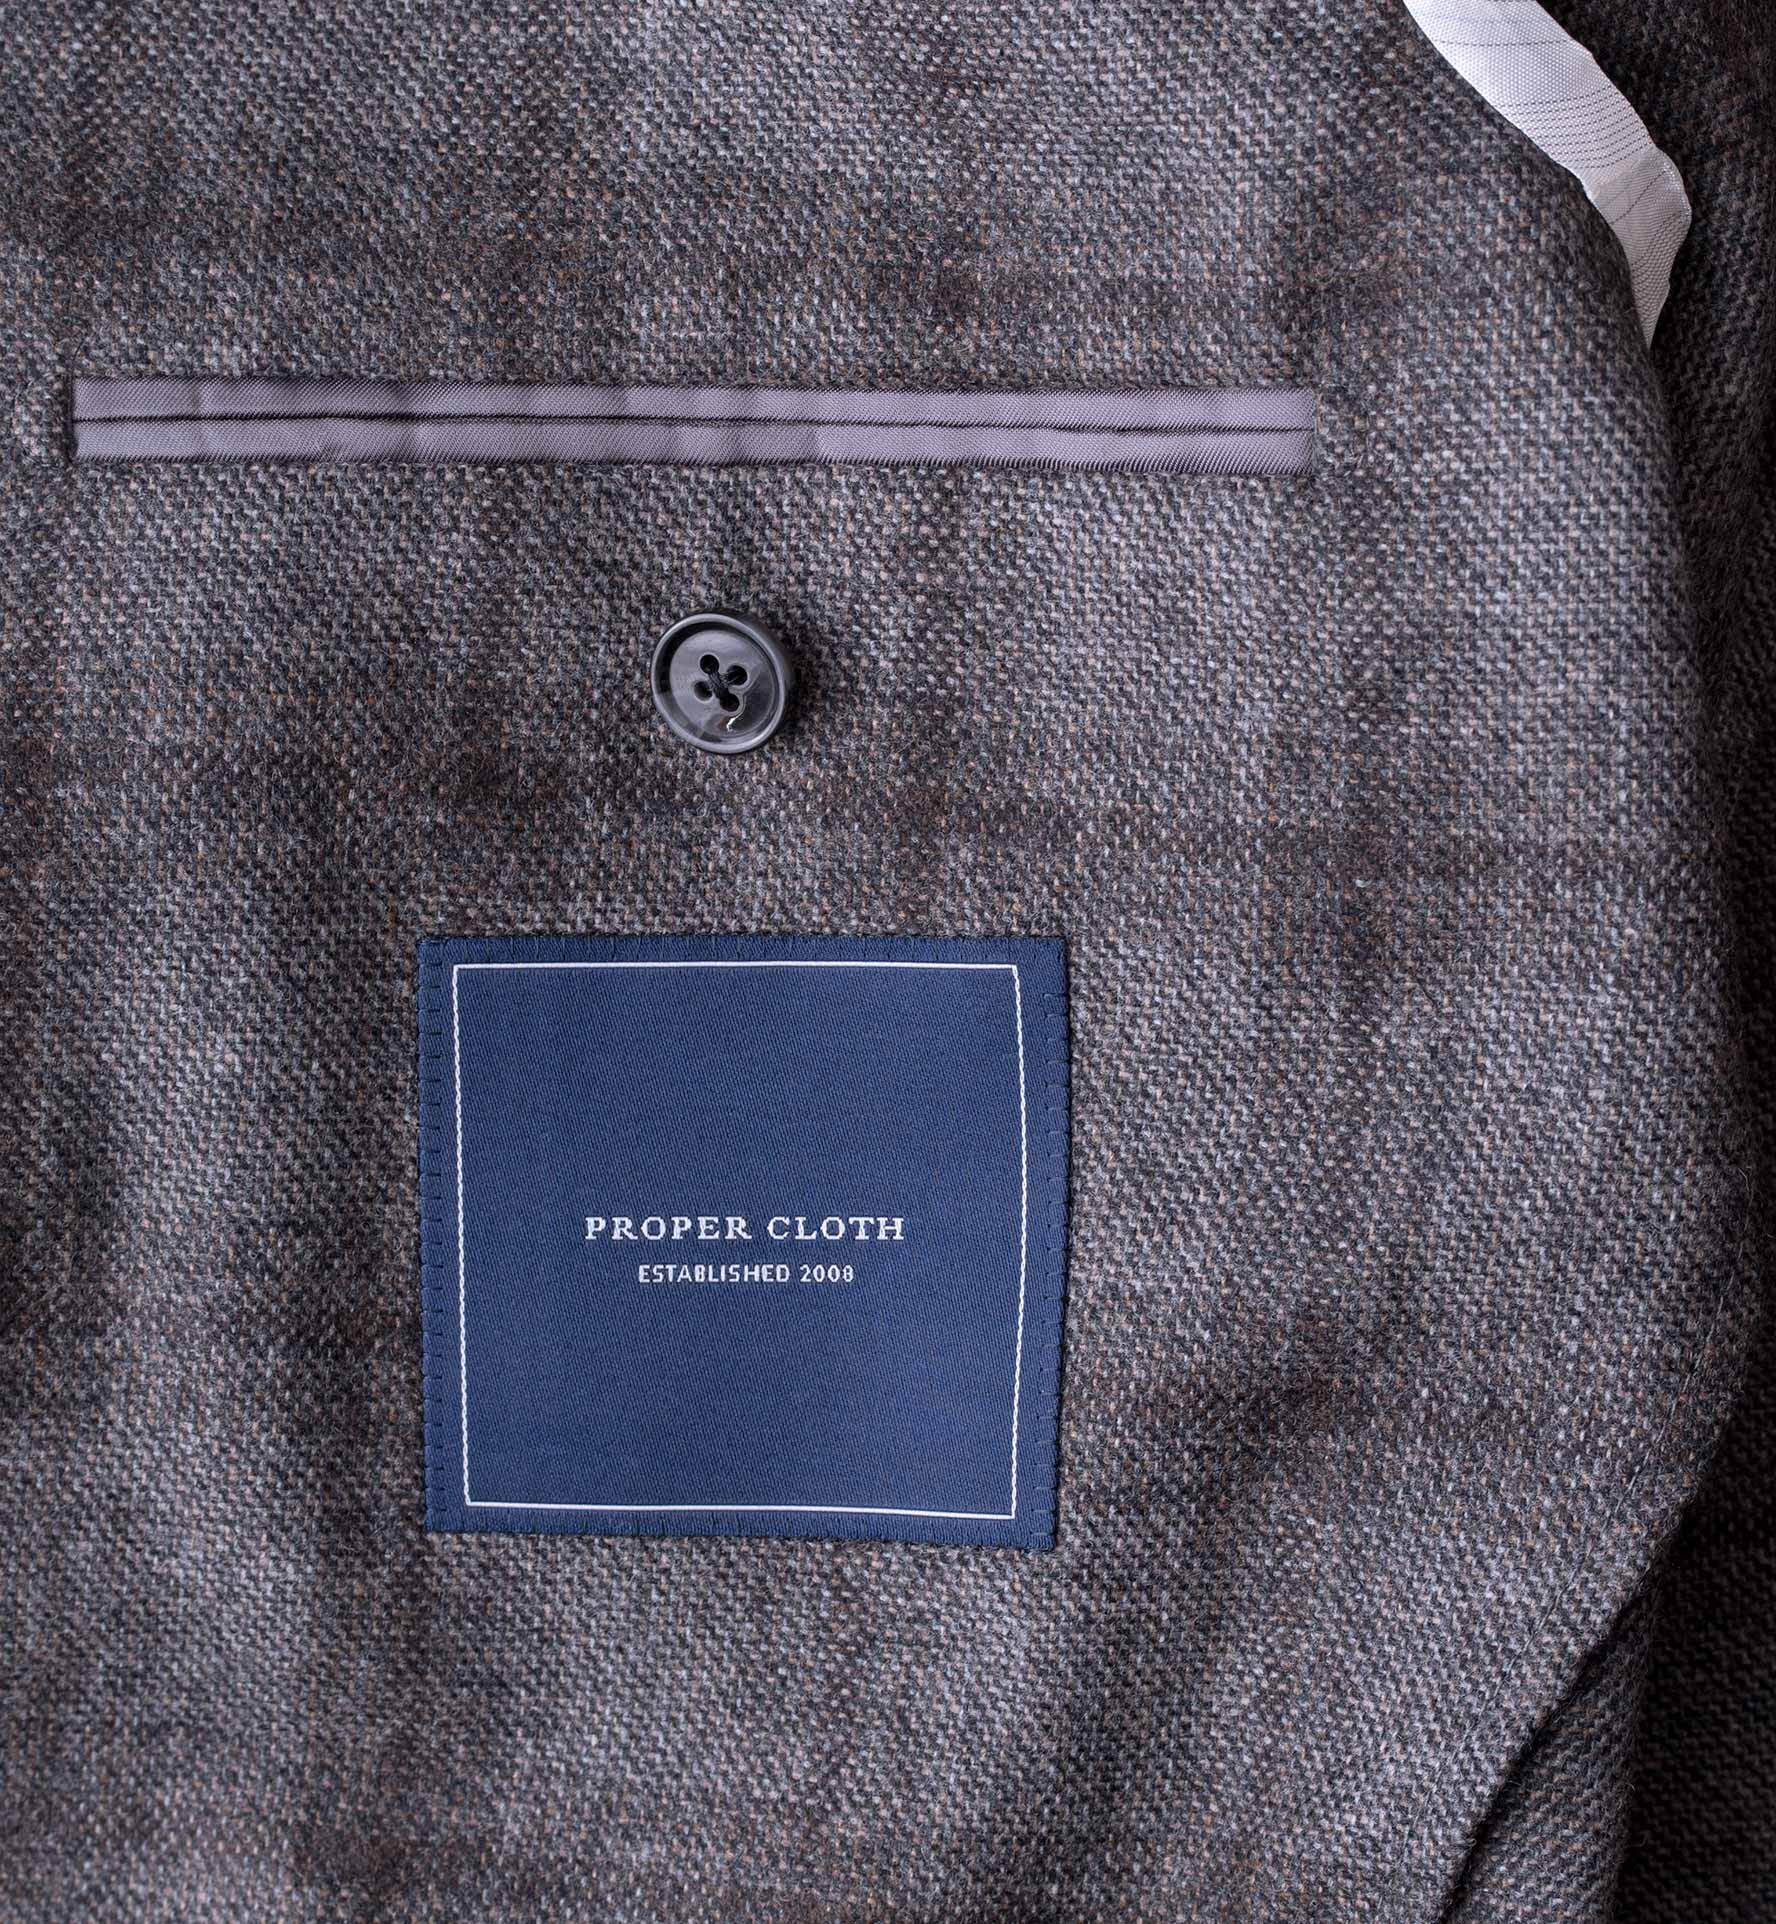 Hudson Grey Plaid Wool and Cashmere Flannel Jacket by Proper Cloth